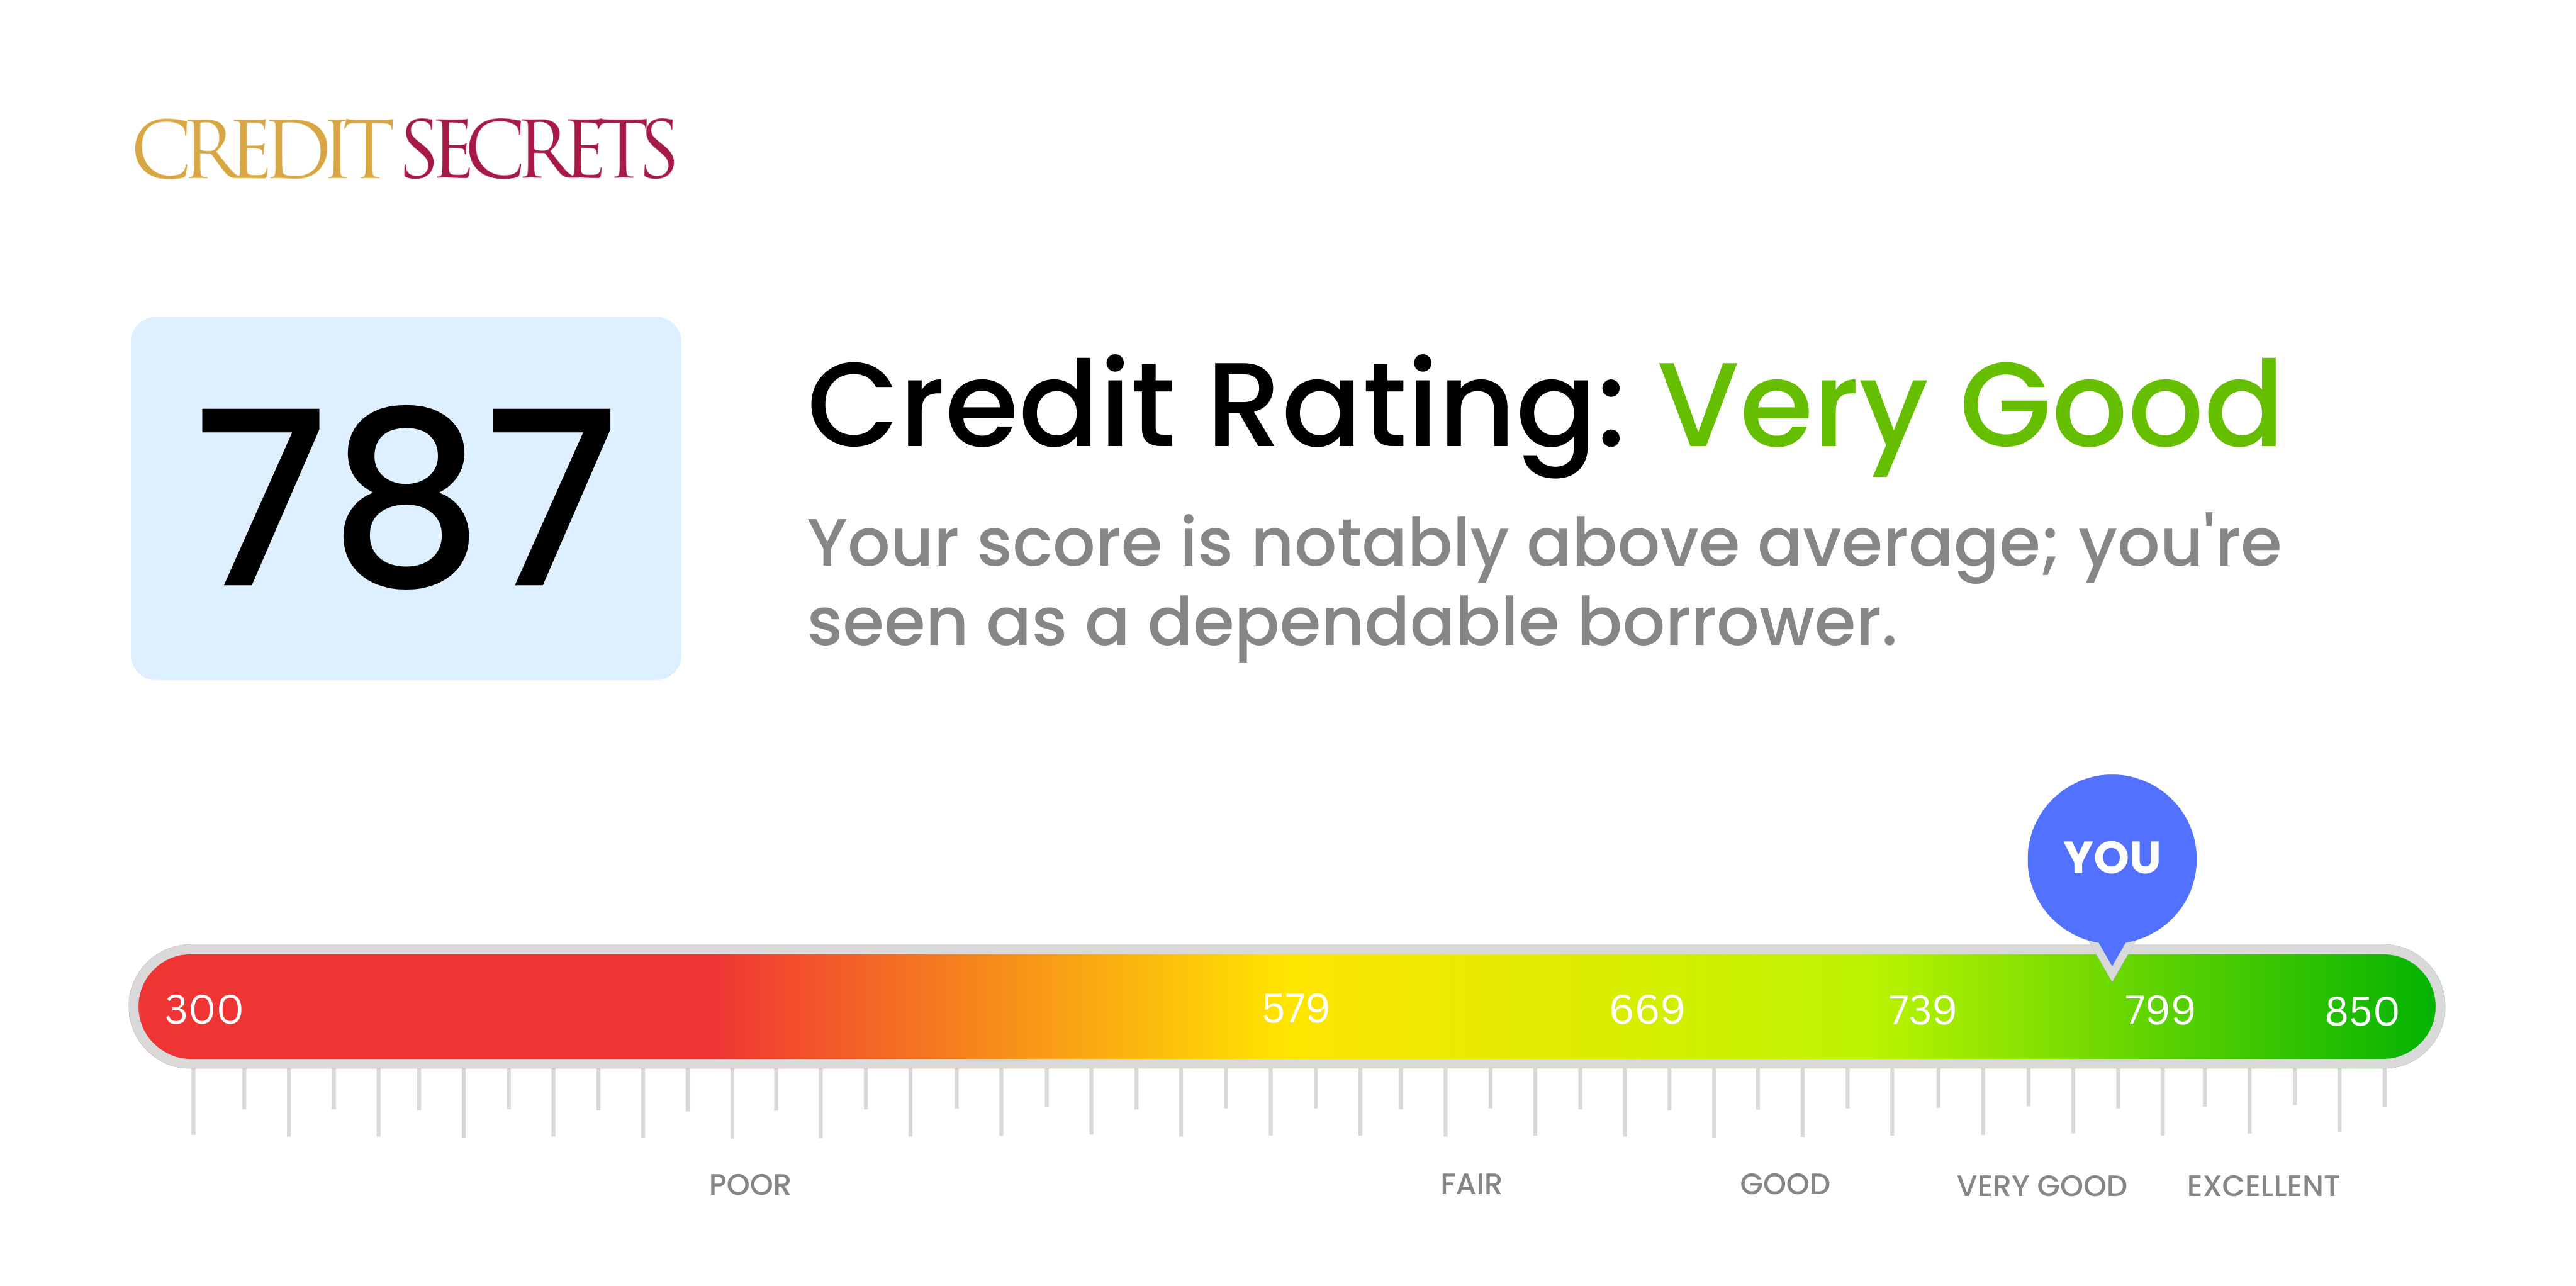 Is 787 a good credit score?